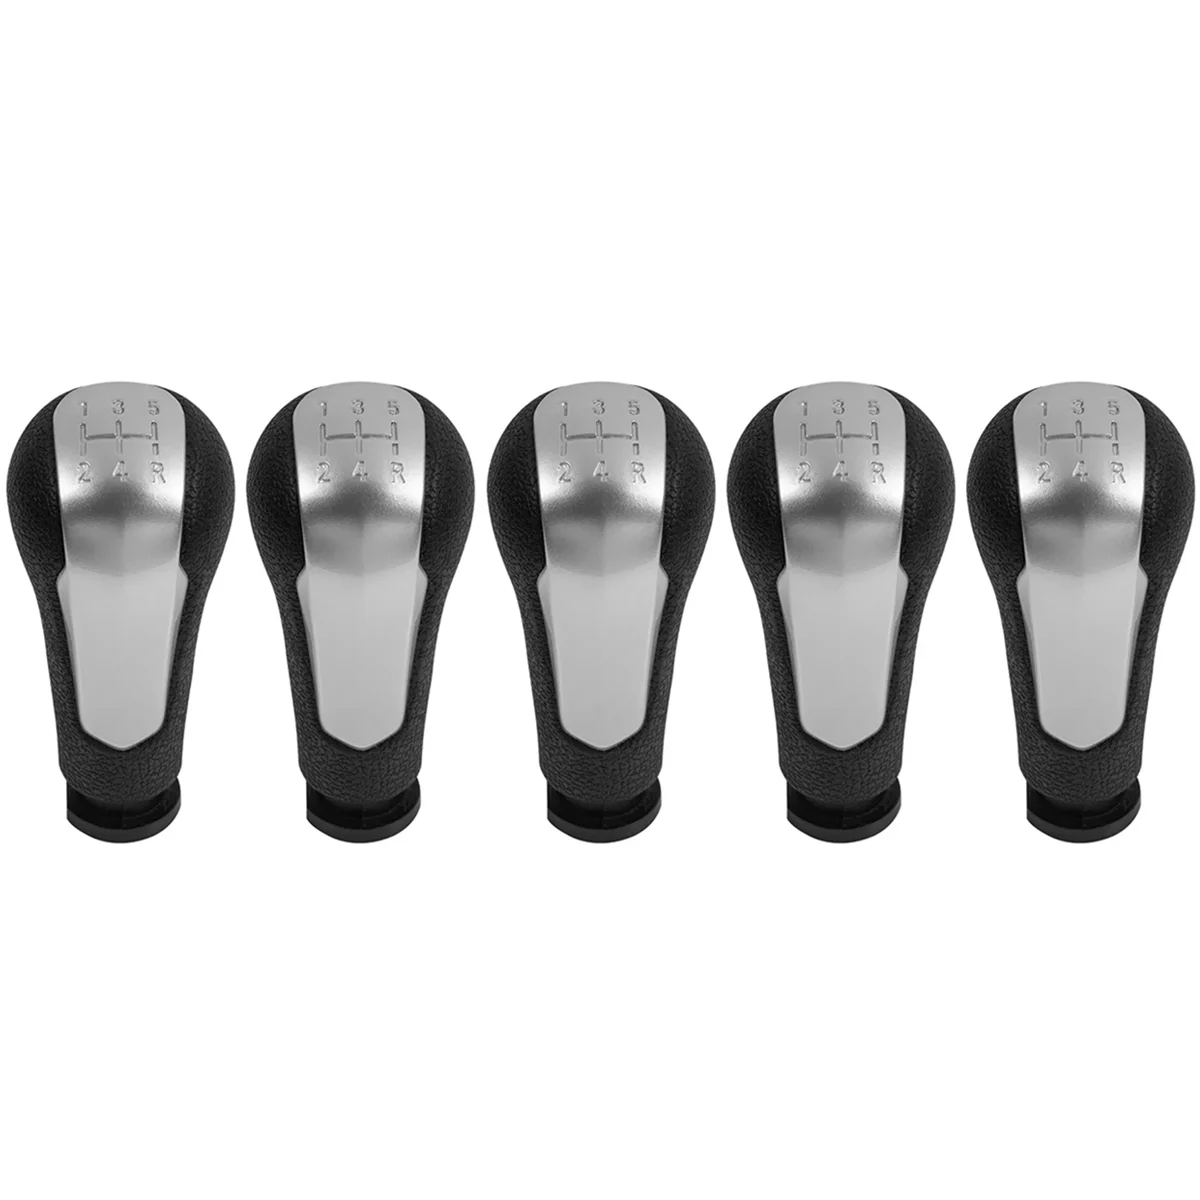 

5X 5 Speed Gear Shift Knob Lever Shifter Handle Stick for Chevrolet Spark 2011-2016 Silver